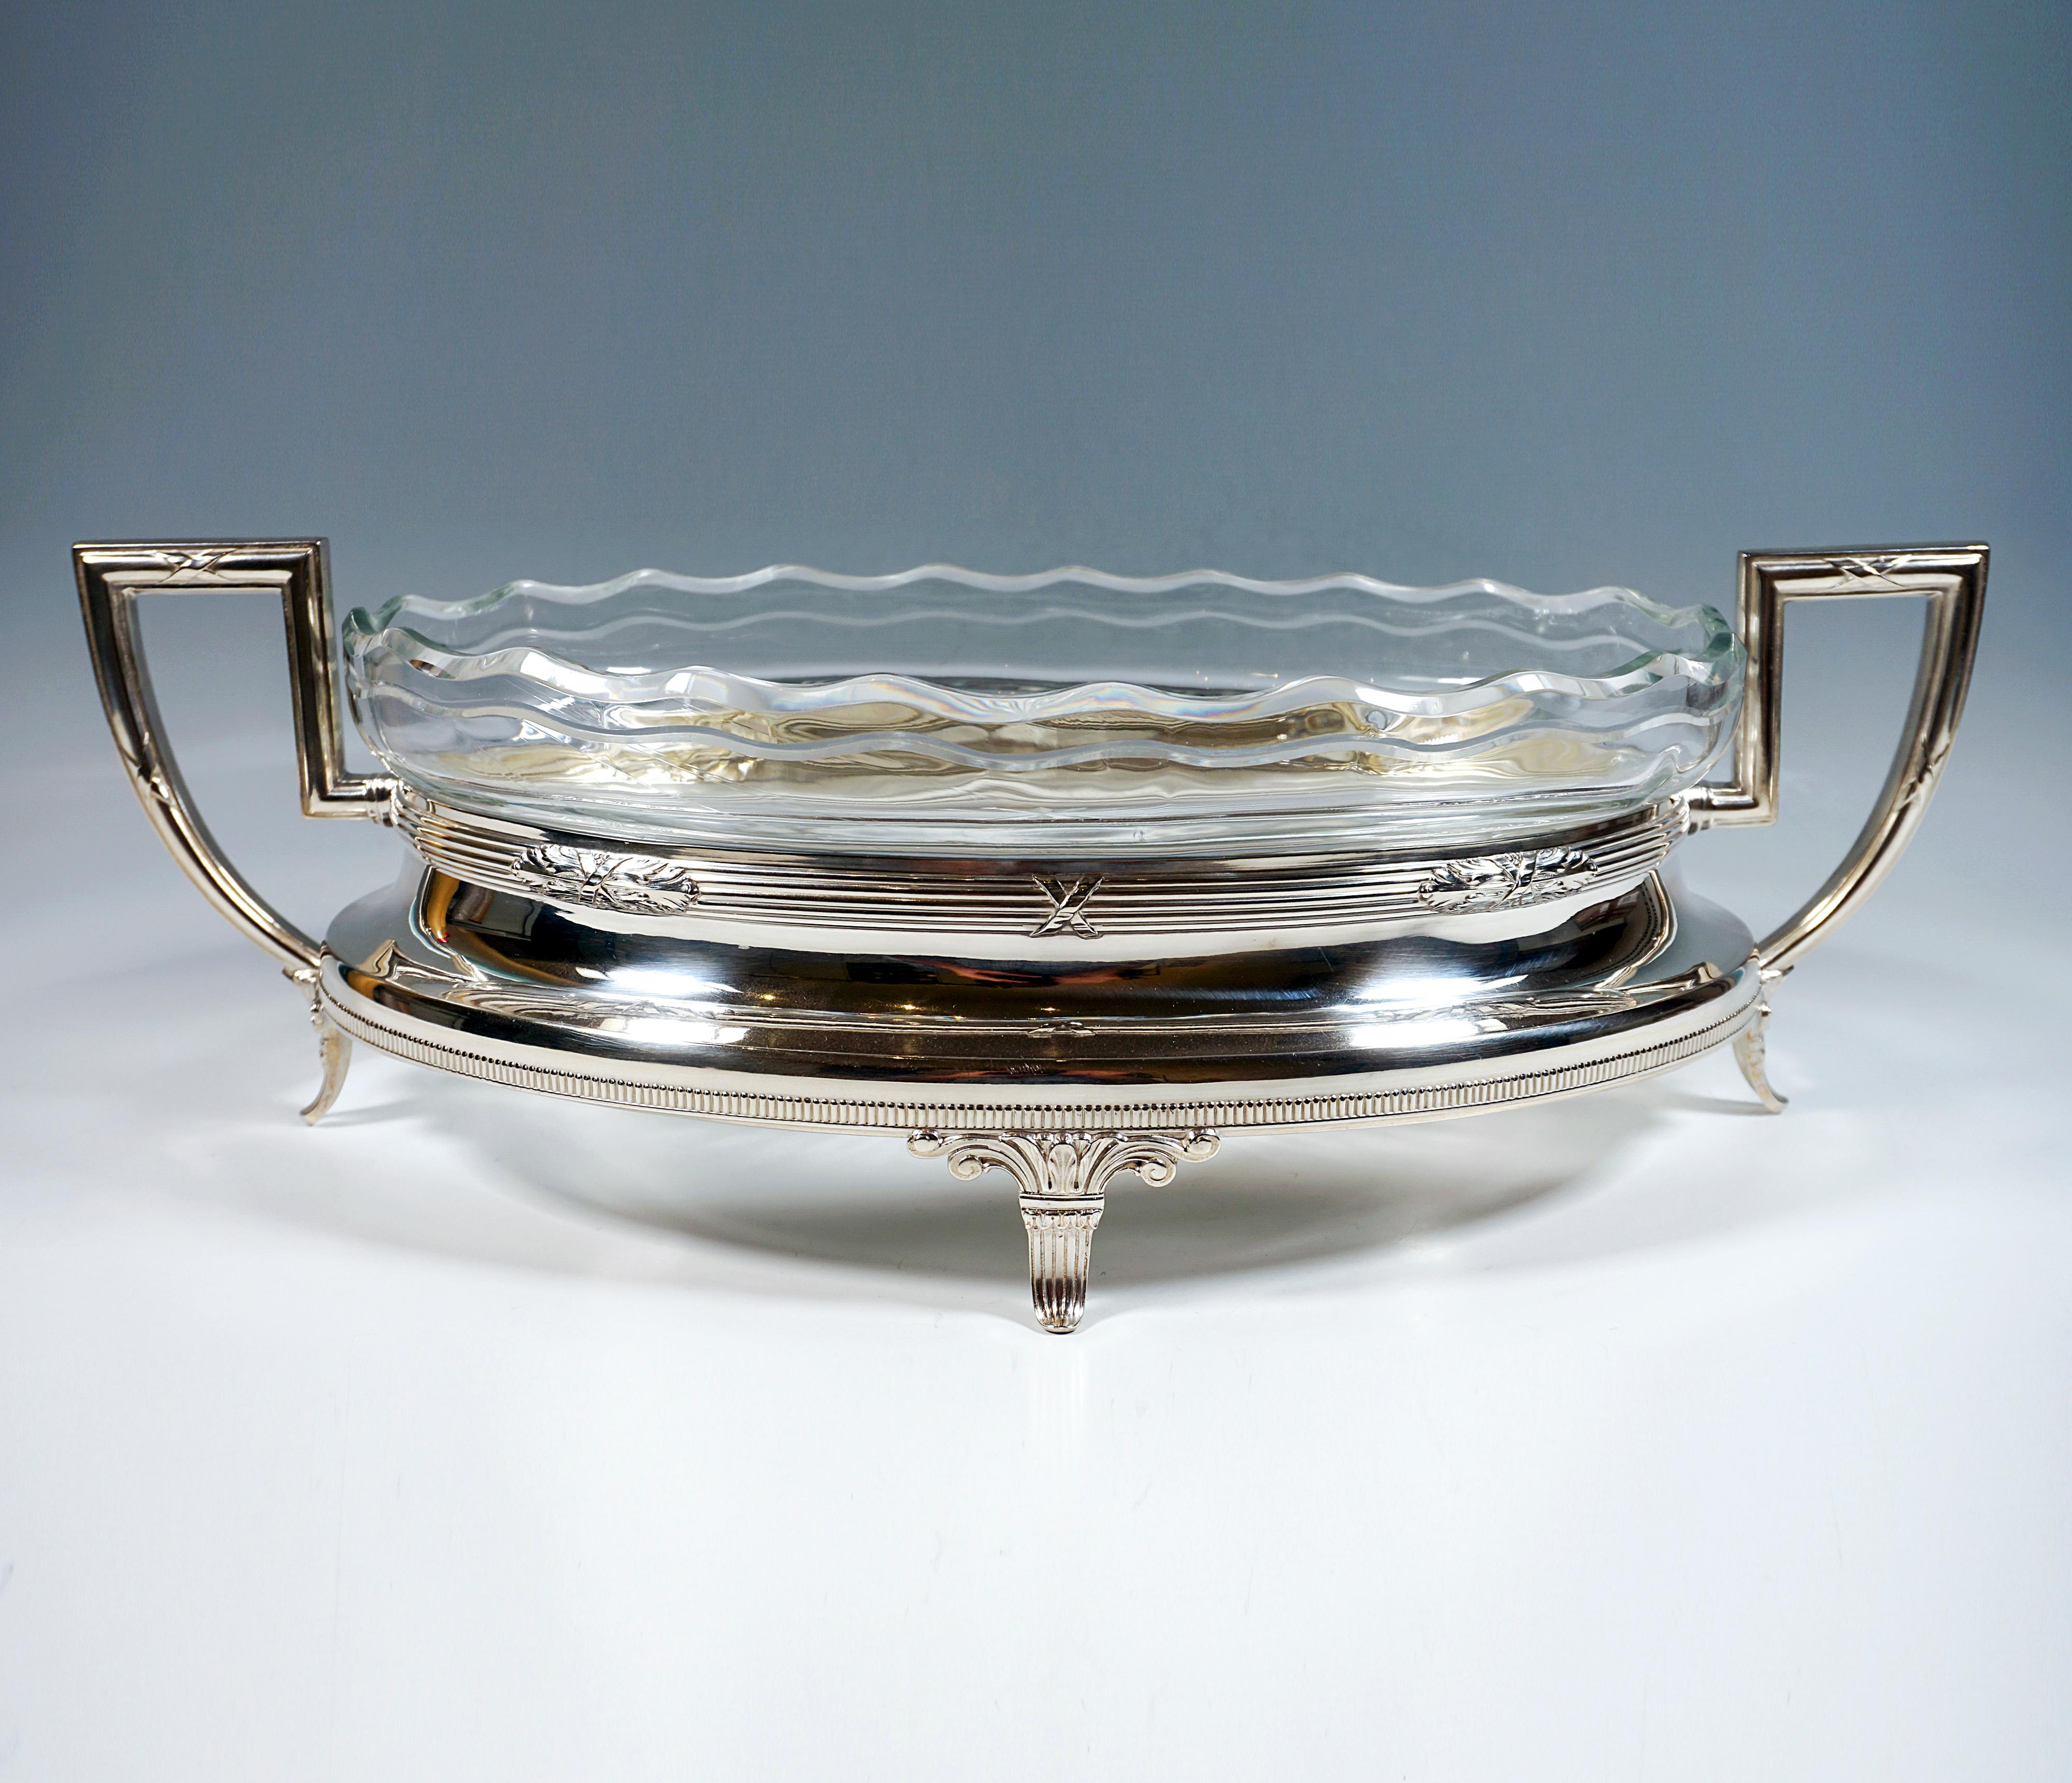 Early 20th Century Art Nouveau Silver Jardinière With Waved Glass Liner Wilhelm Binder Germany 1900 For Sale